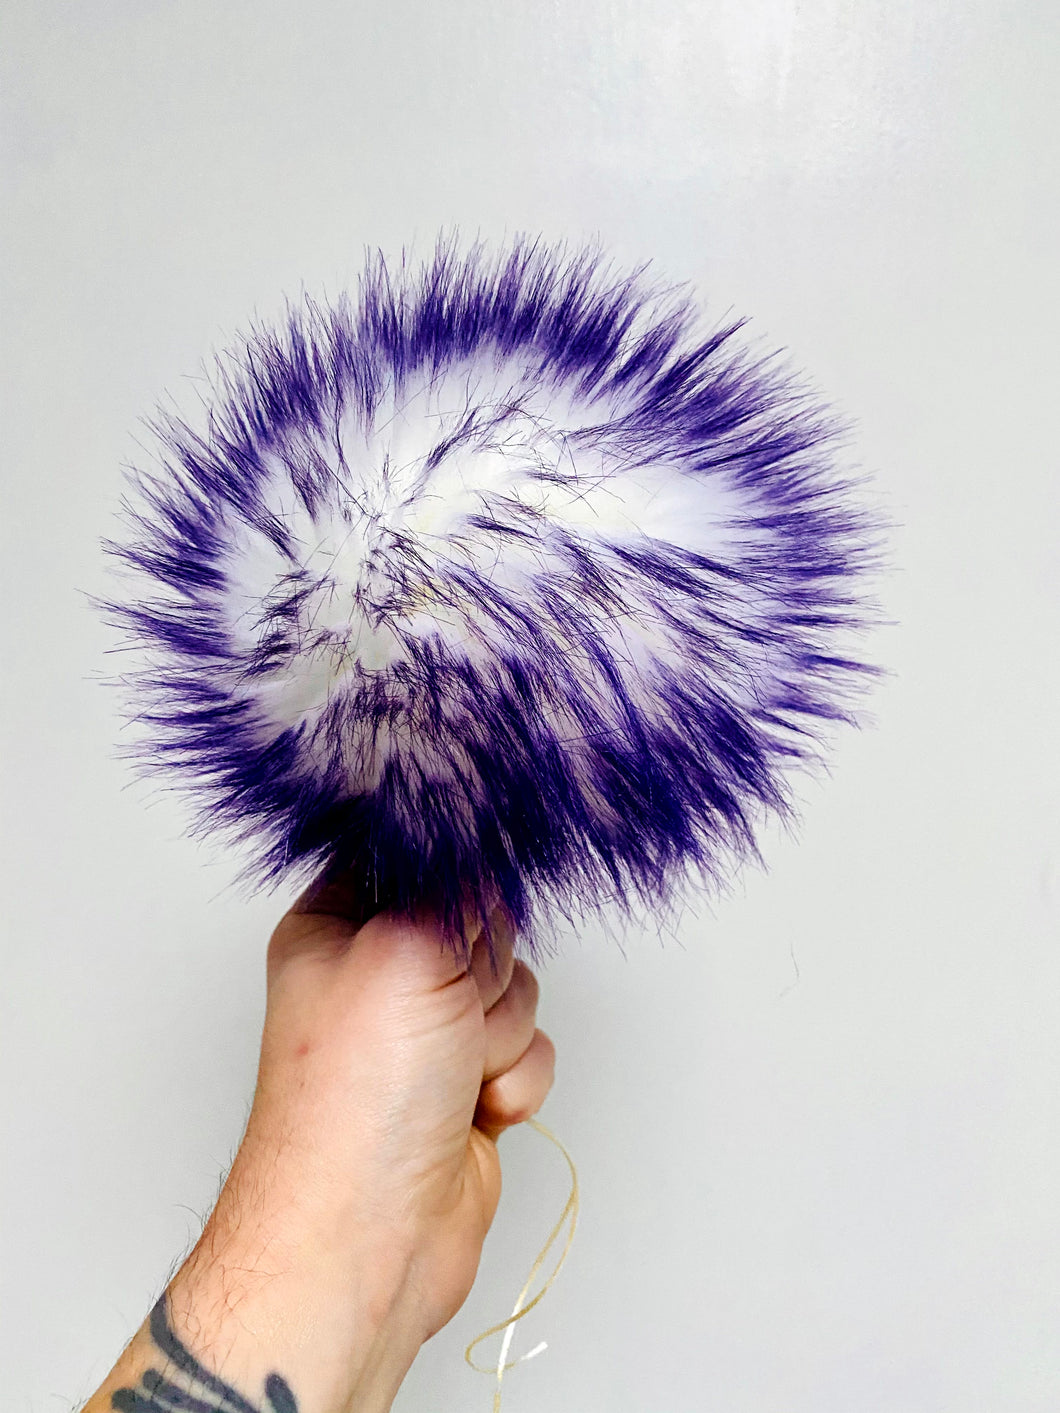 MADE TO ORDER Fun and funky white with purple tip faux fur pom pom with wooden button